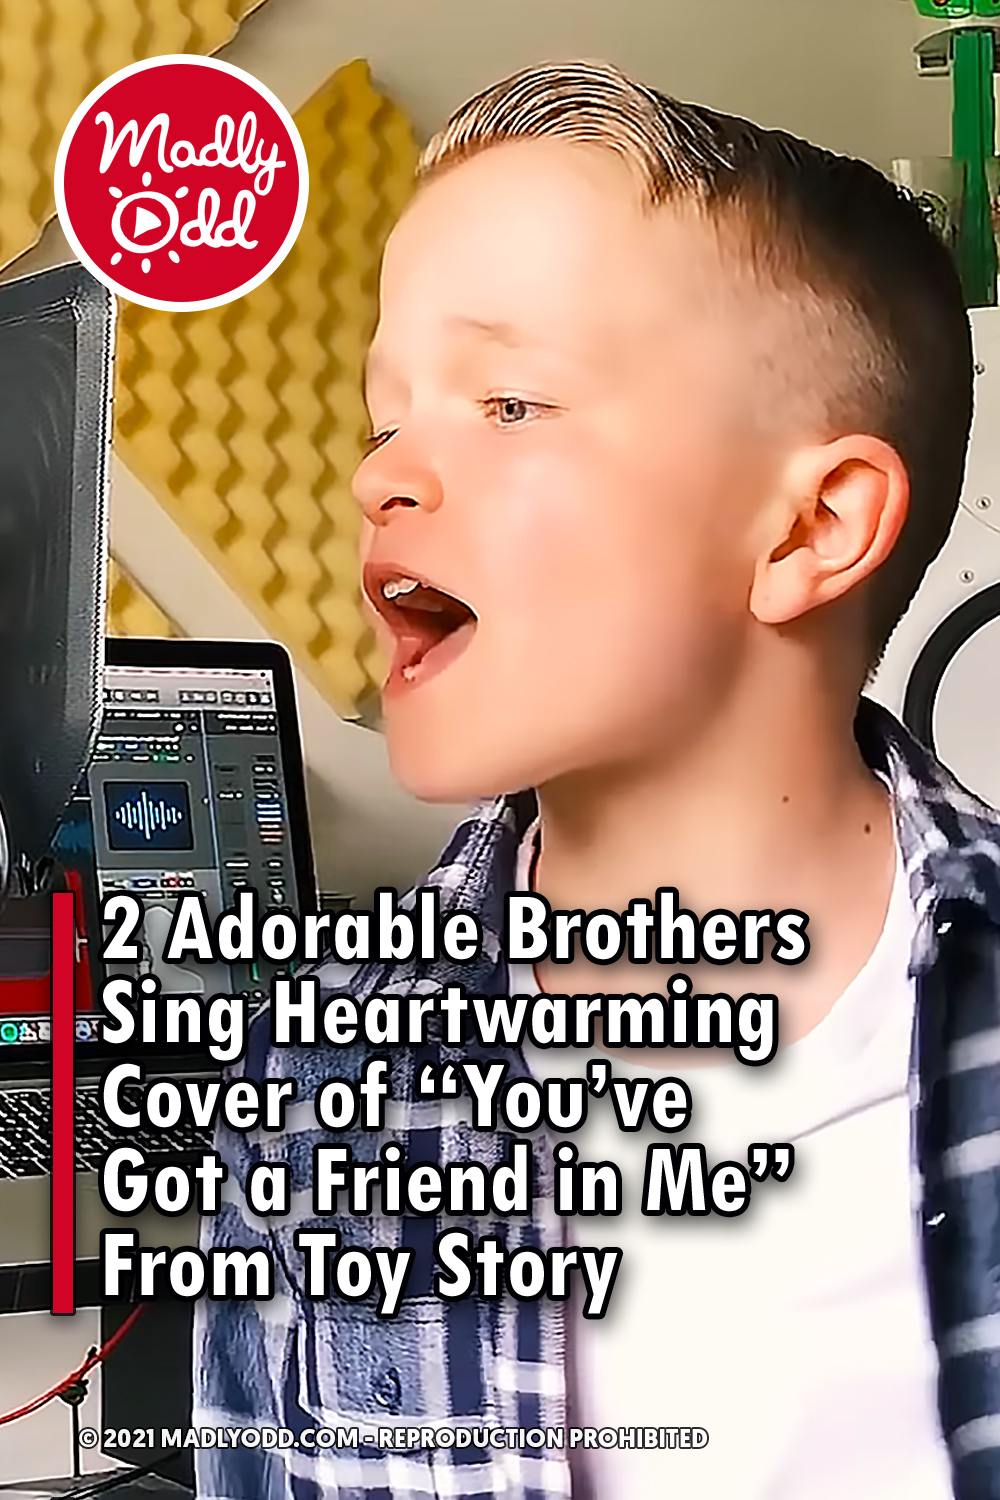 2 Adorable Brothers Sing Heartwarming Cover of “You’ve Got a Friend in Me” From Toy Story